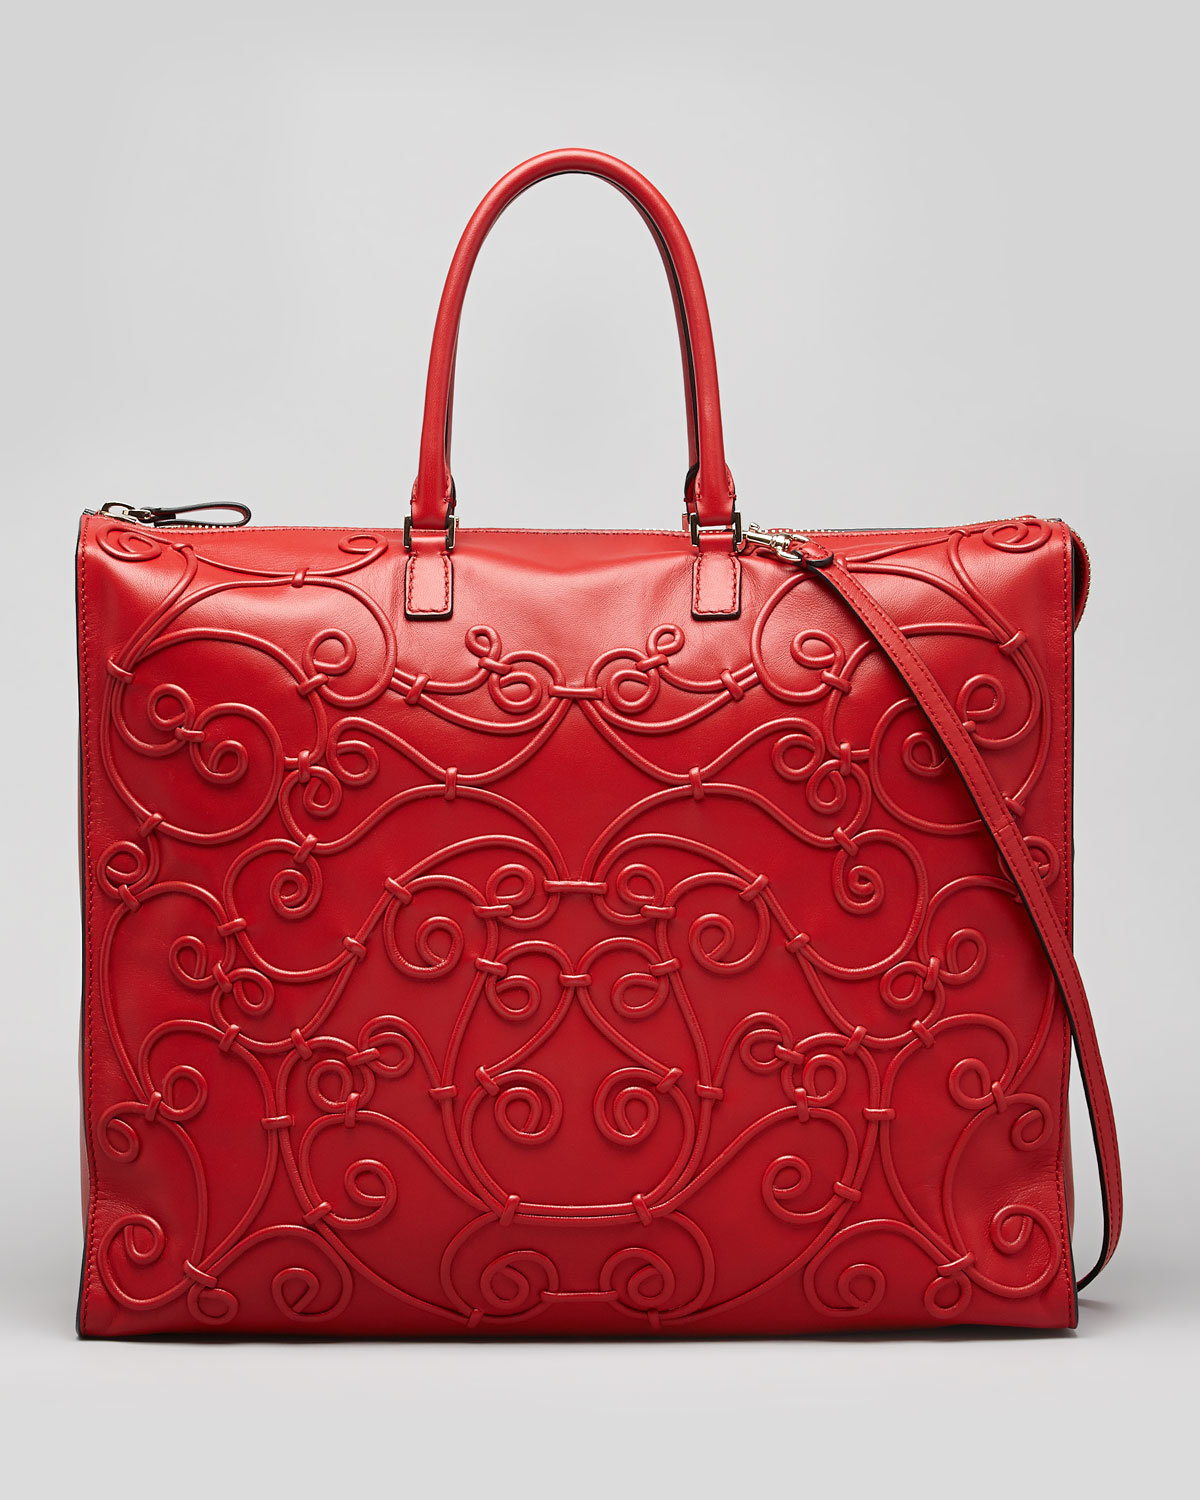 Lyst - Valentino Intricate Soutache Tote Bag Red in Red